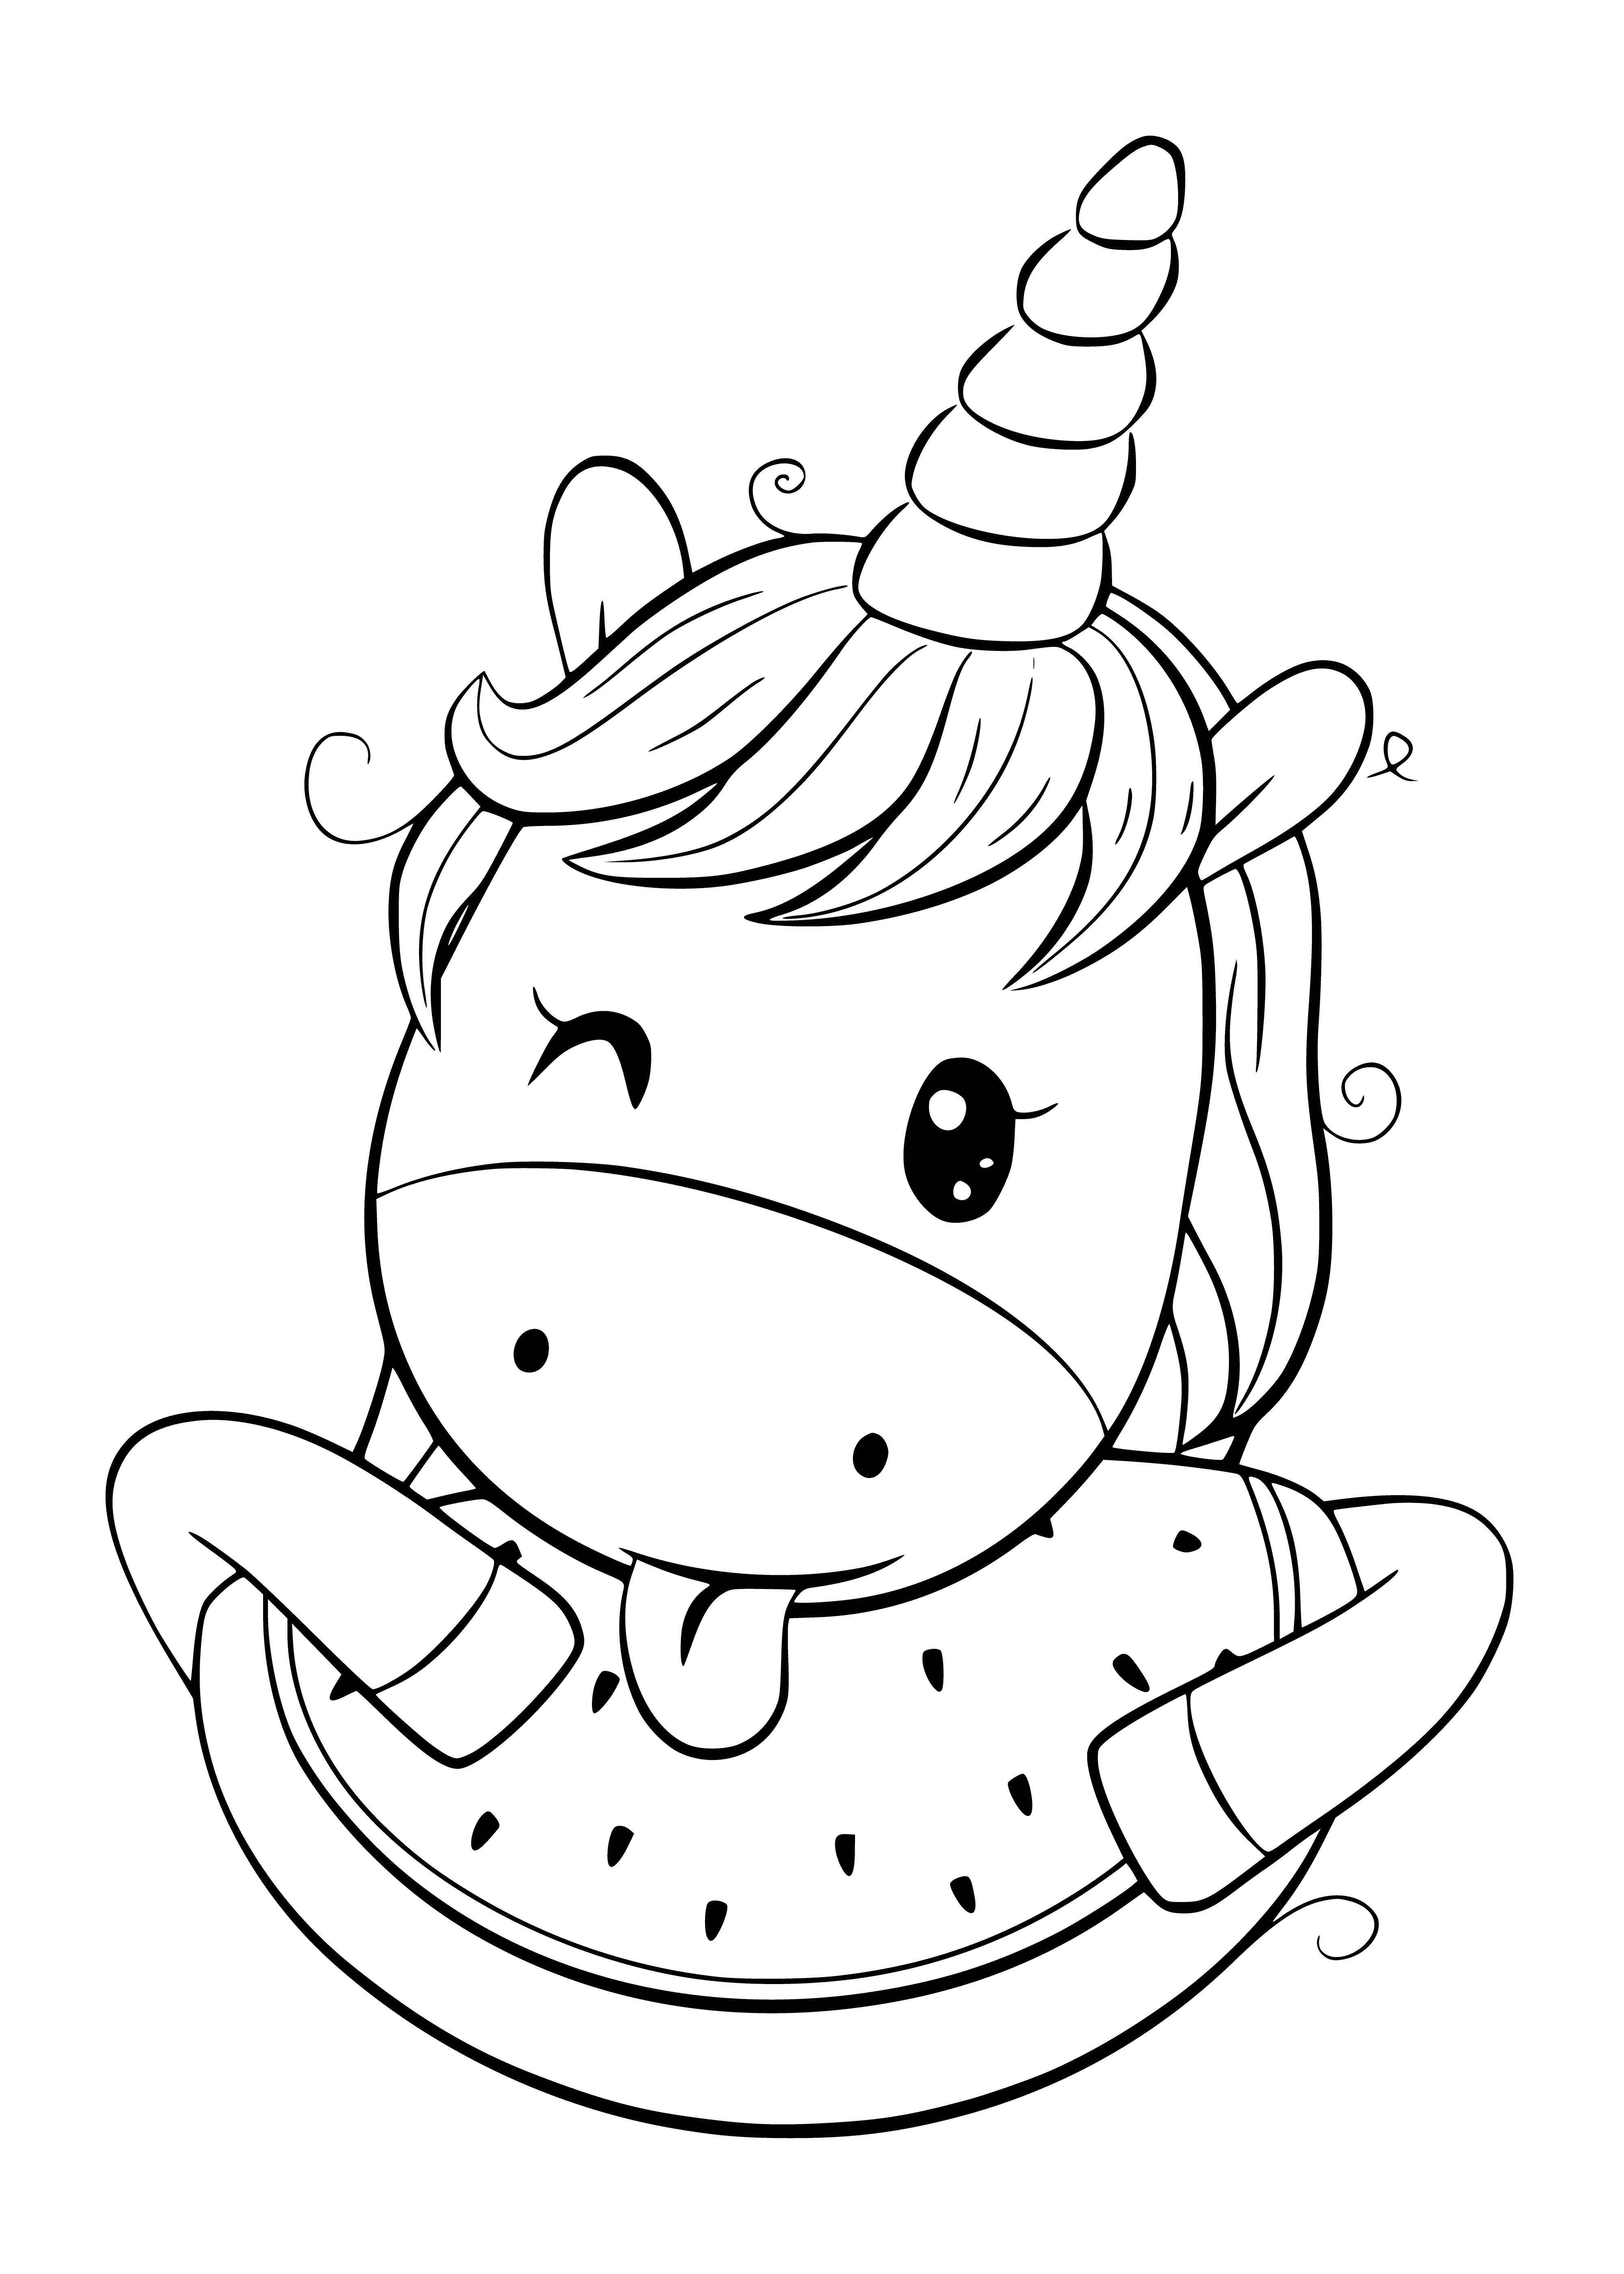 Unicorn with watermelon coloring page